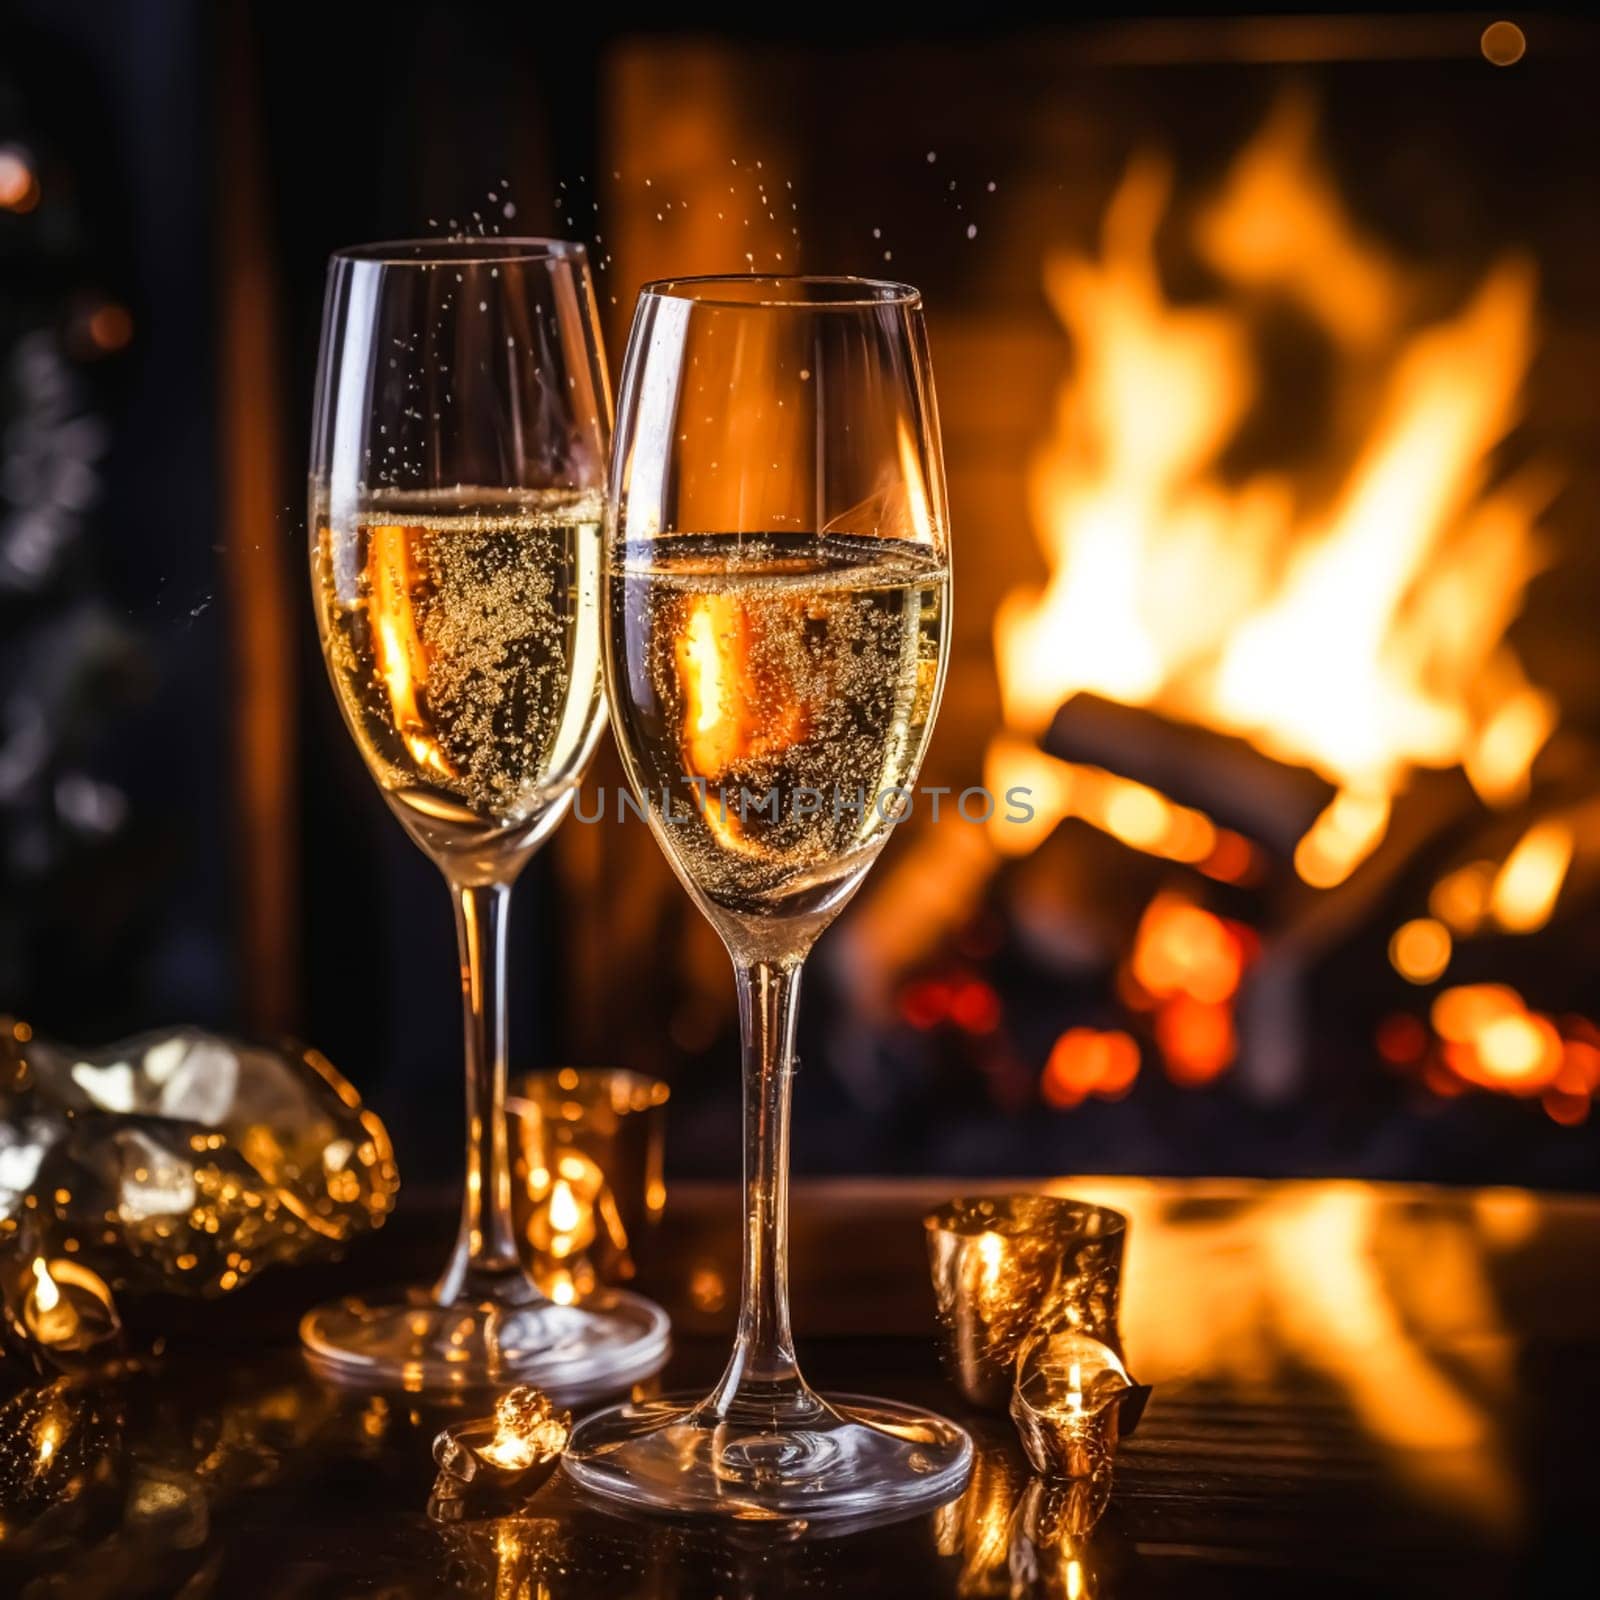 Sparkling wine, proseco or champagne in front of a fireplace on a holiday eve celebration, Merry Christmas, Happy New Year and Happy Holidays by Anneleven